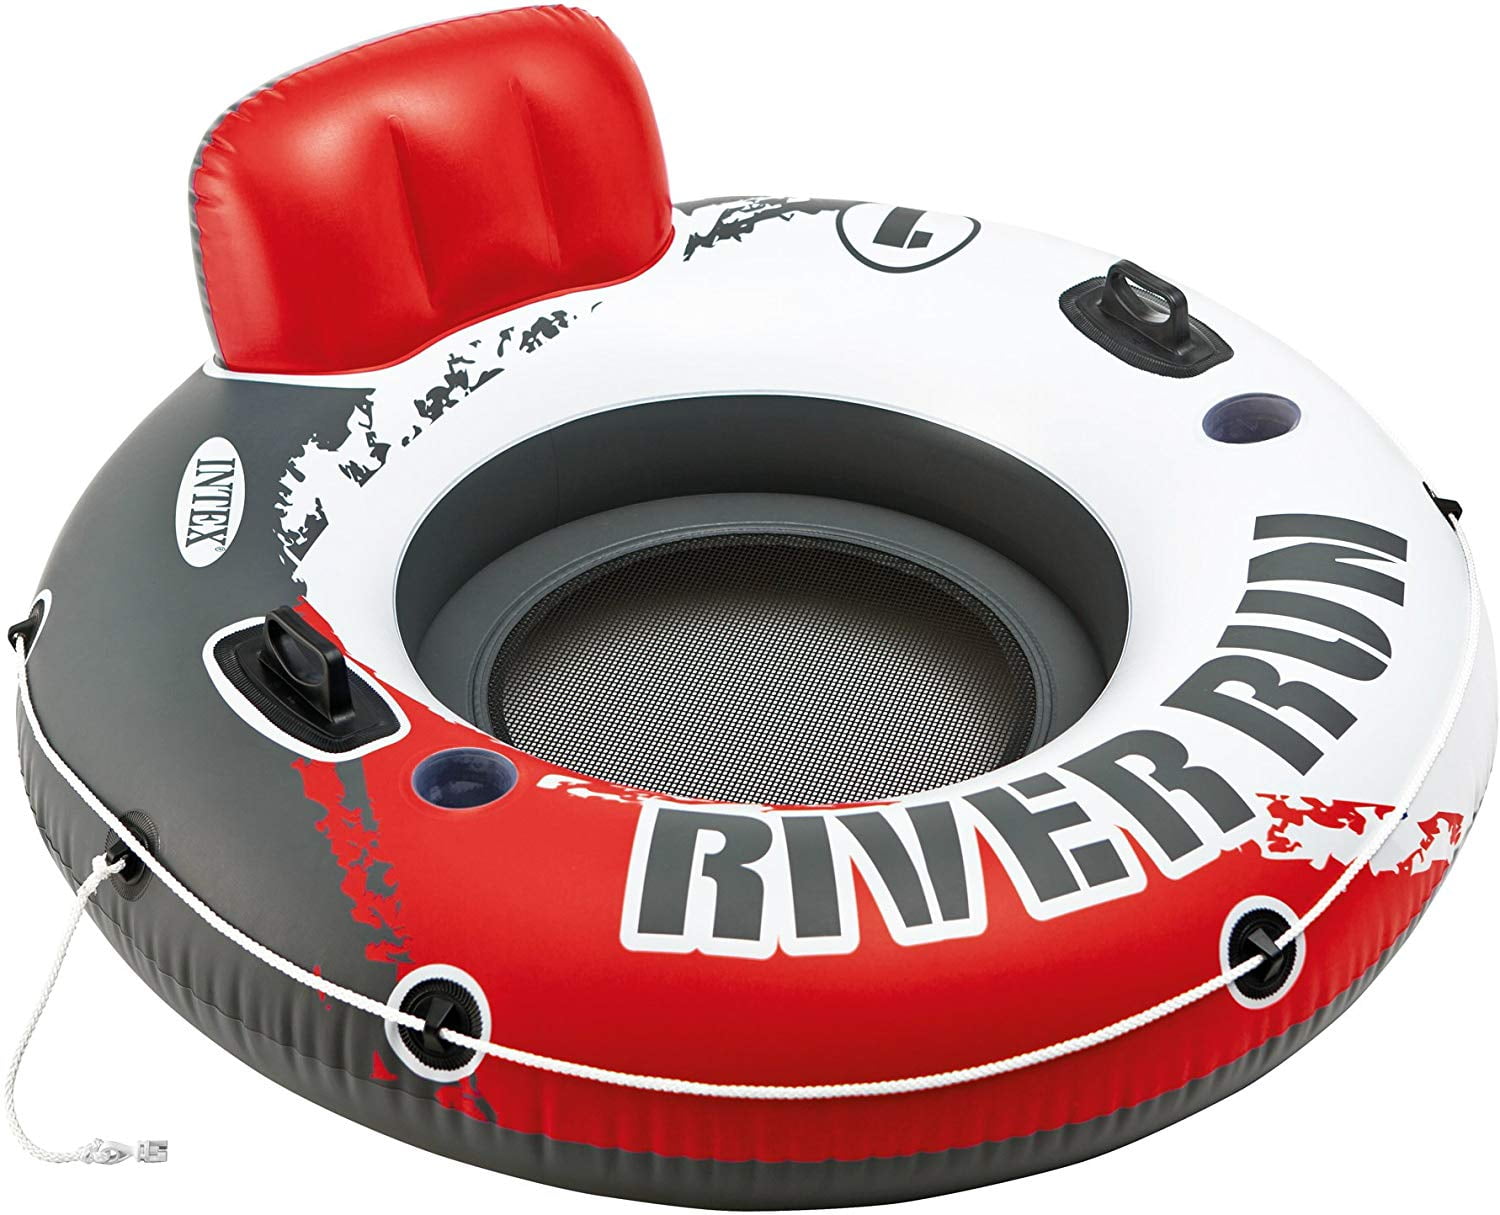 Intex 135cm Inflatable Round Ride-On Seat Run Tube River/Pool/Float Adult/Kids 